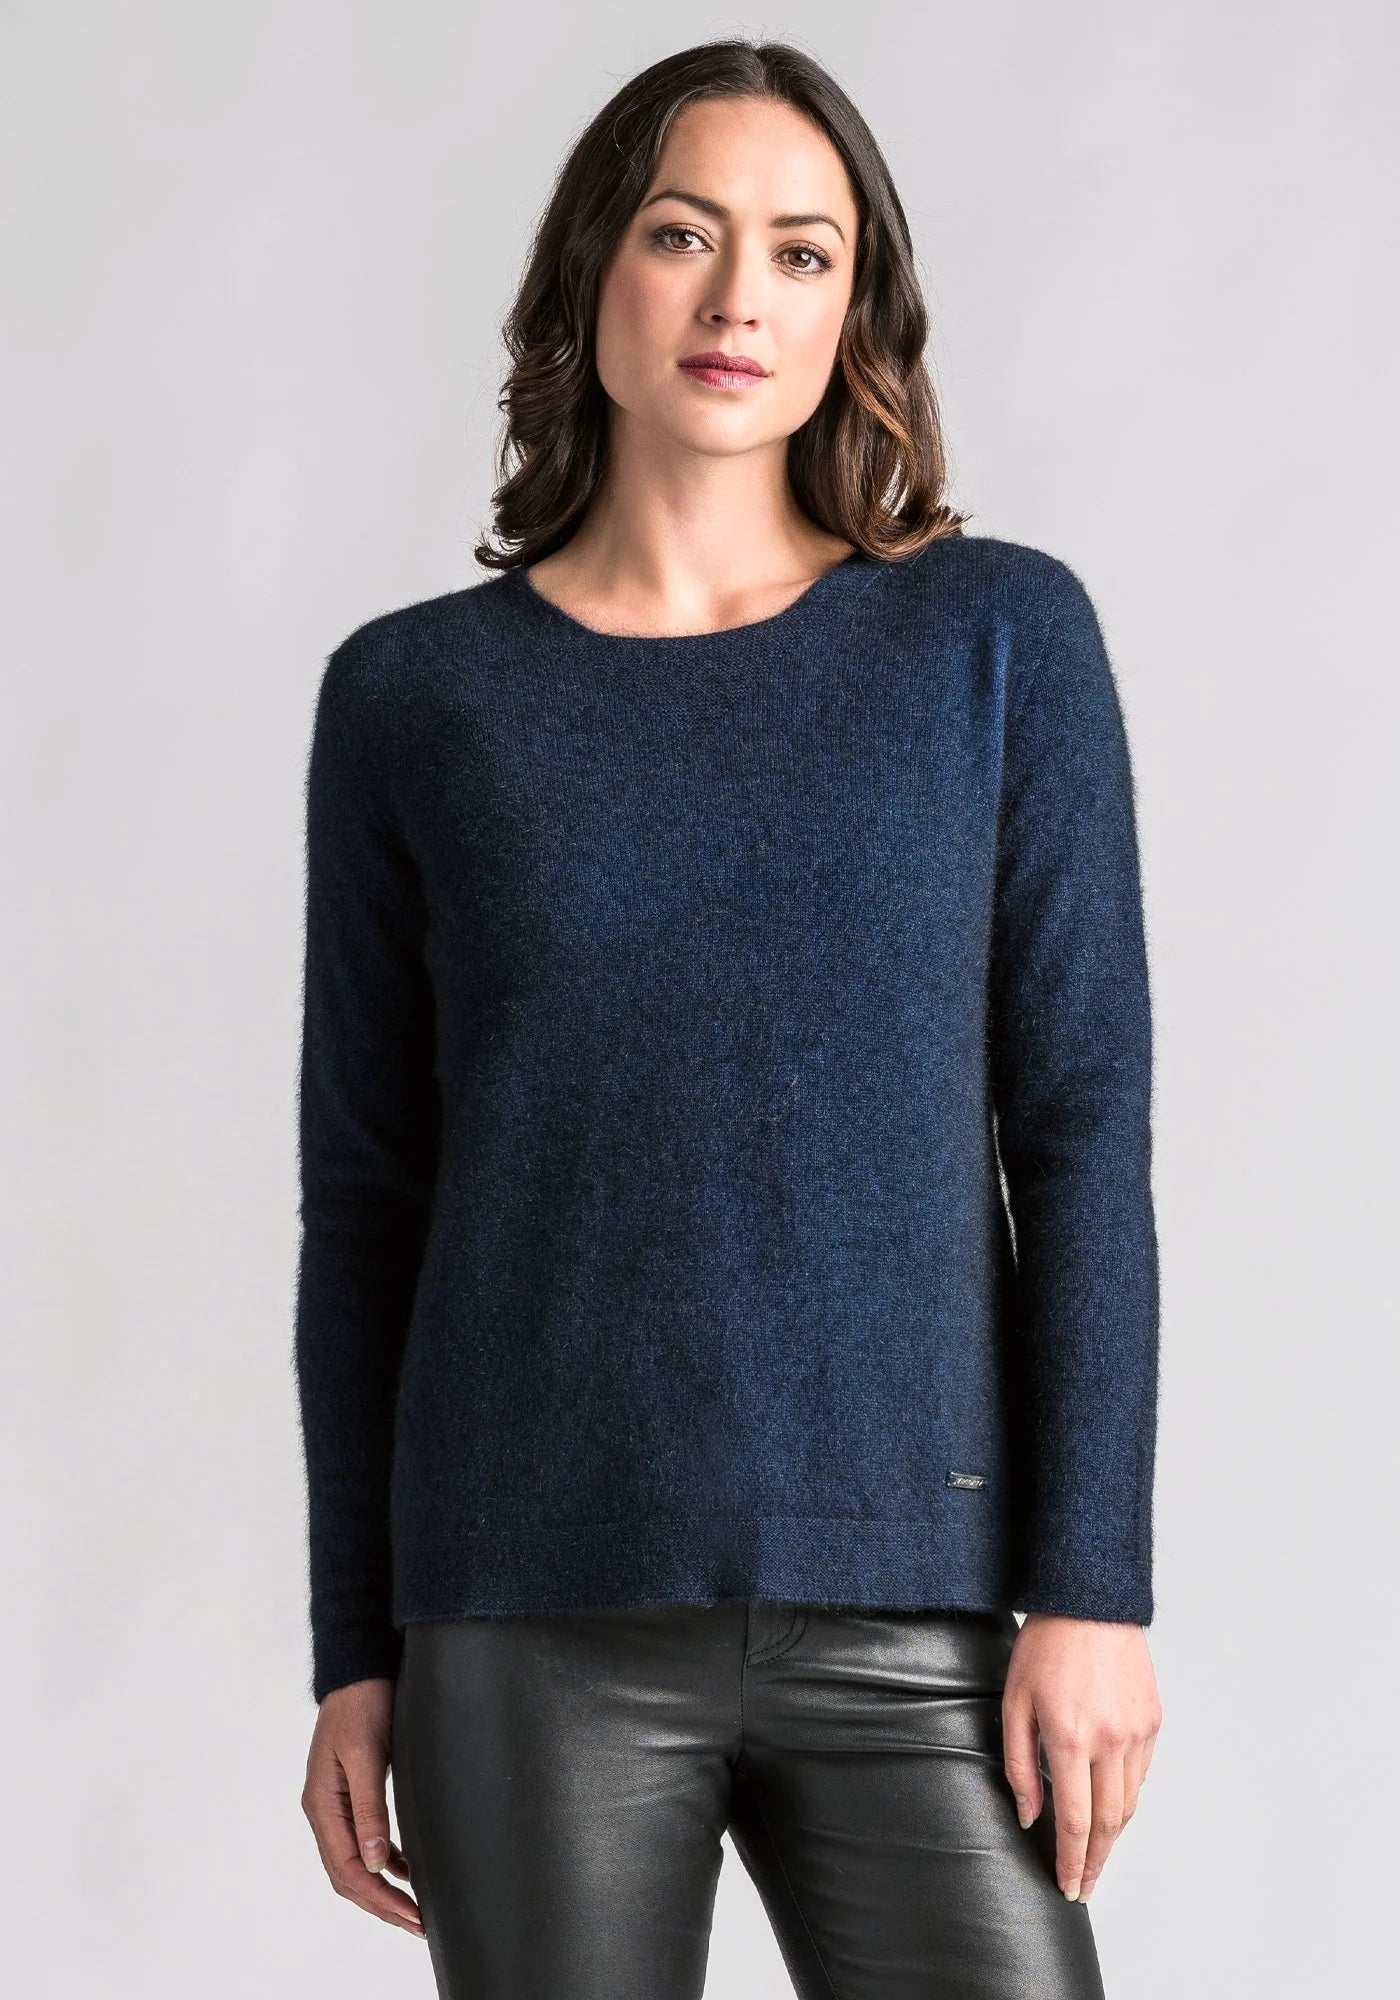 Wrap yourself in luxury with our navy merino wool jumper. Classic style meets ultimate comfort!